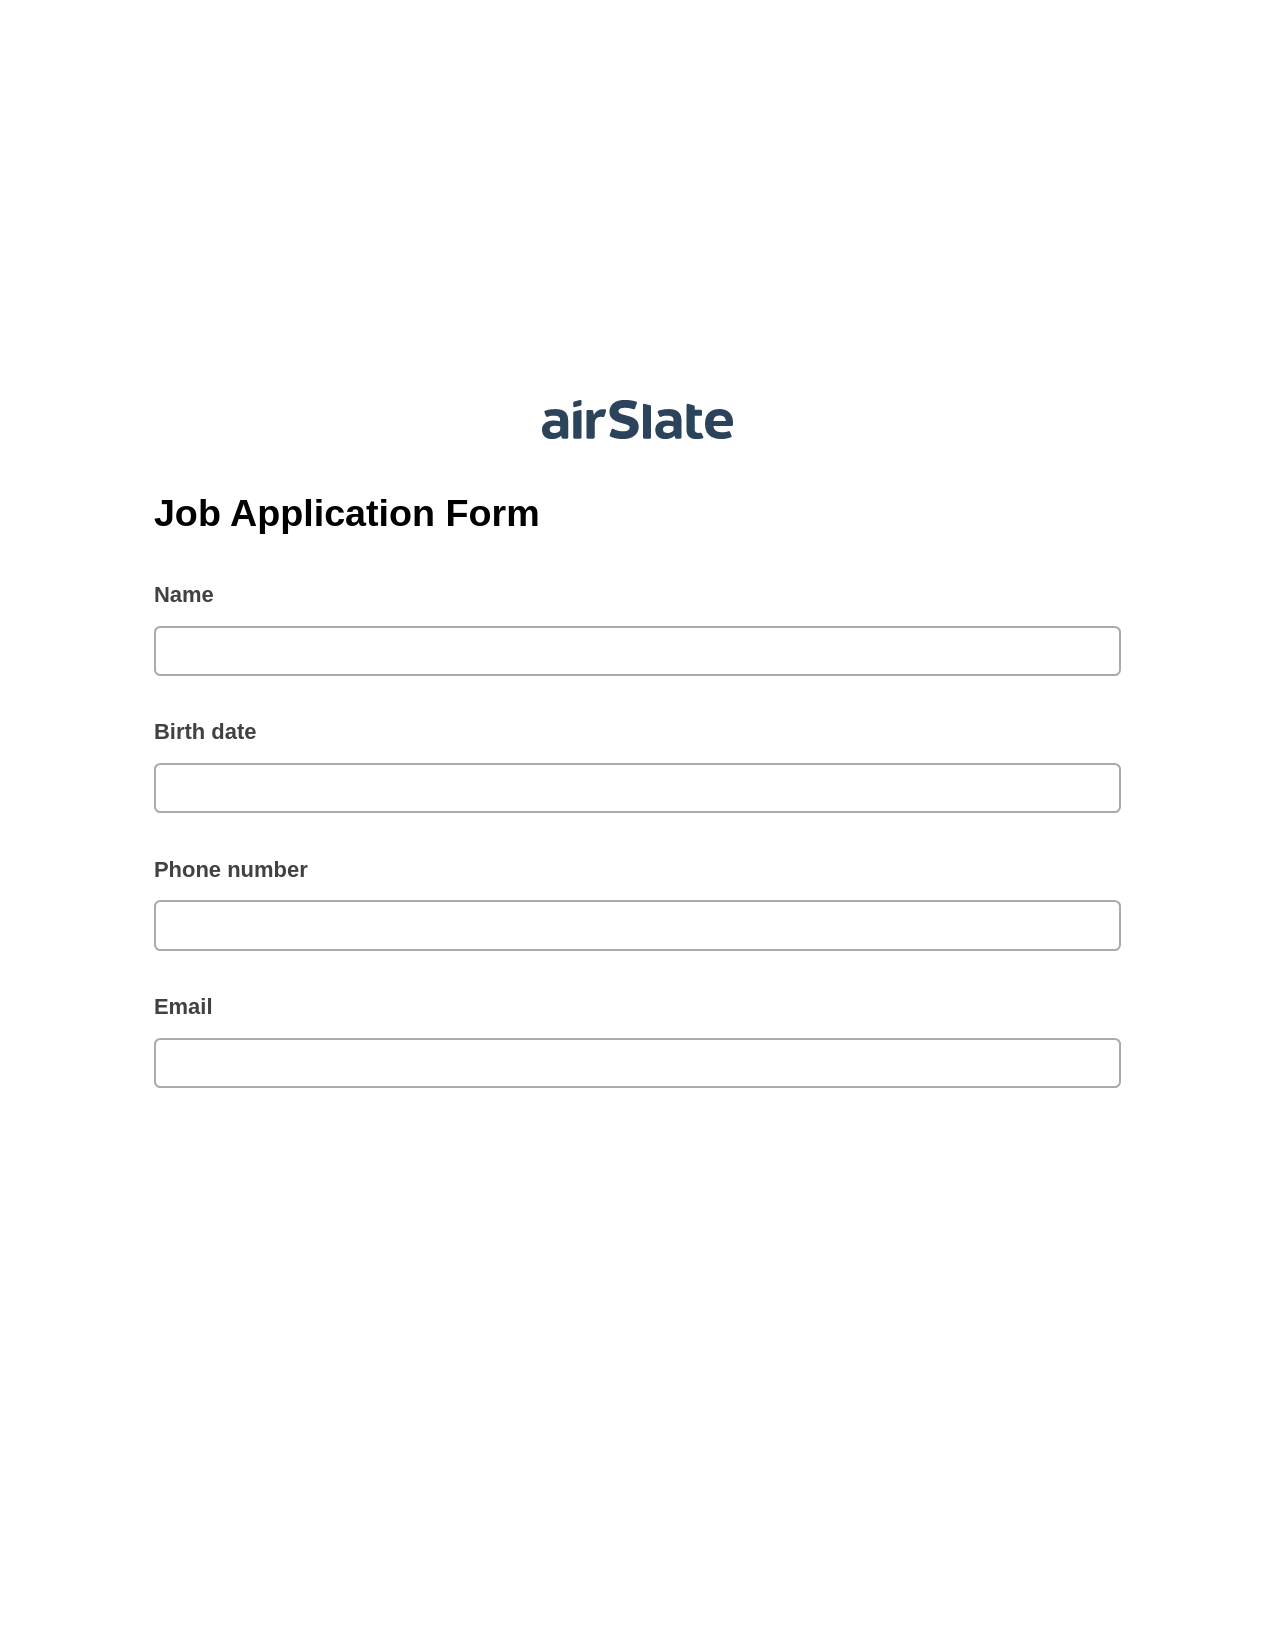 Multirole Job Application Form Pre-fill Slate from MS Dynamics 365 Records Bot, Email Notification Bot, Box Bot